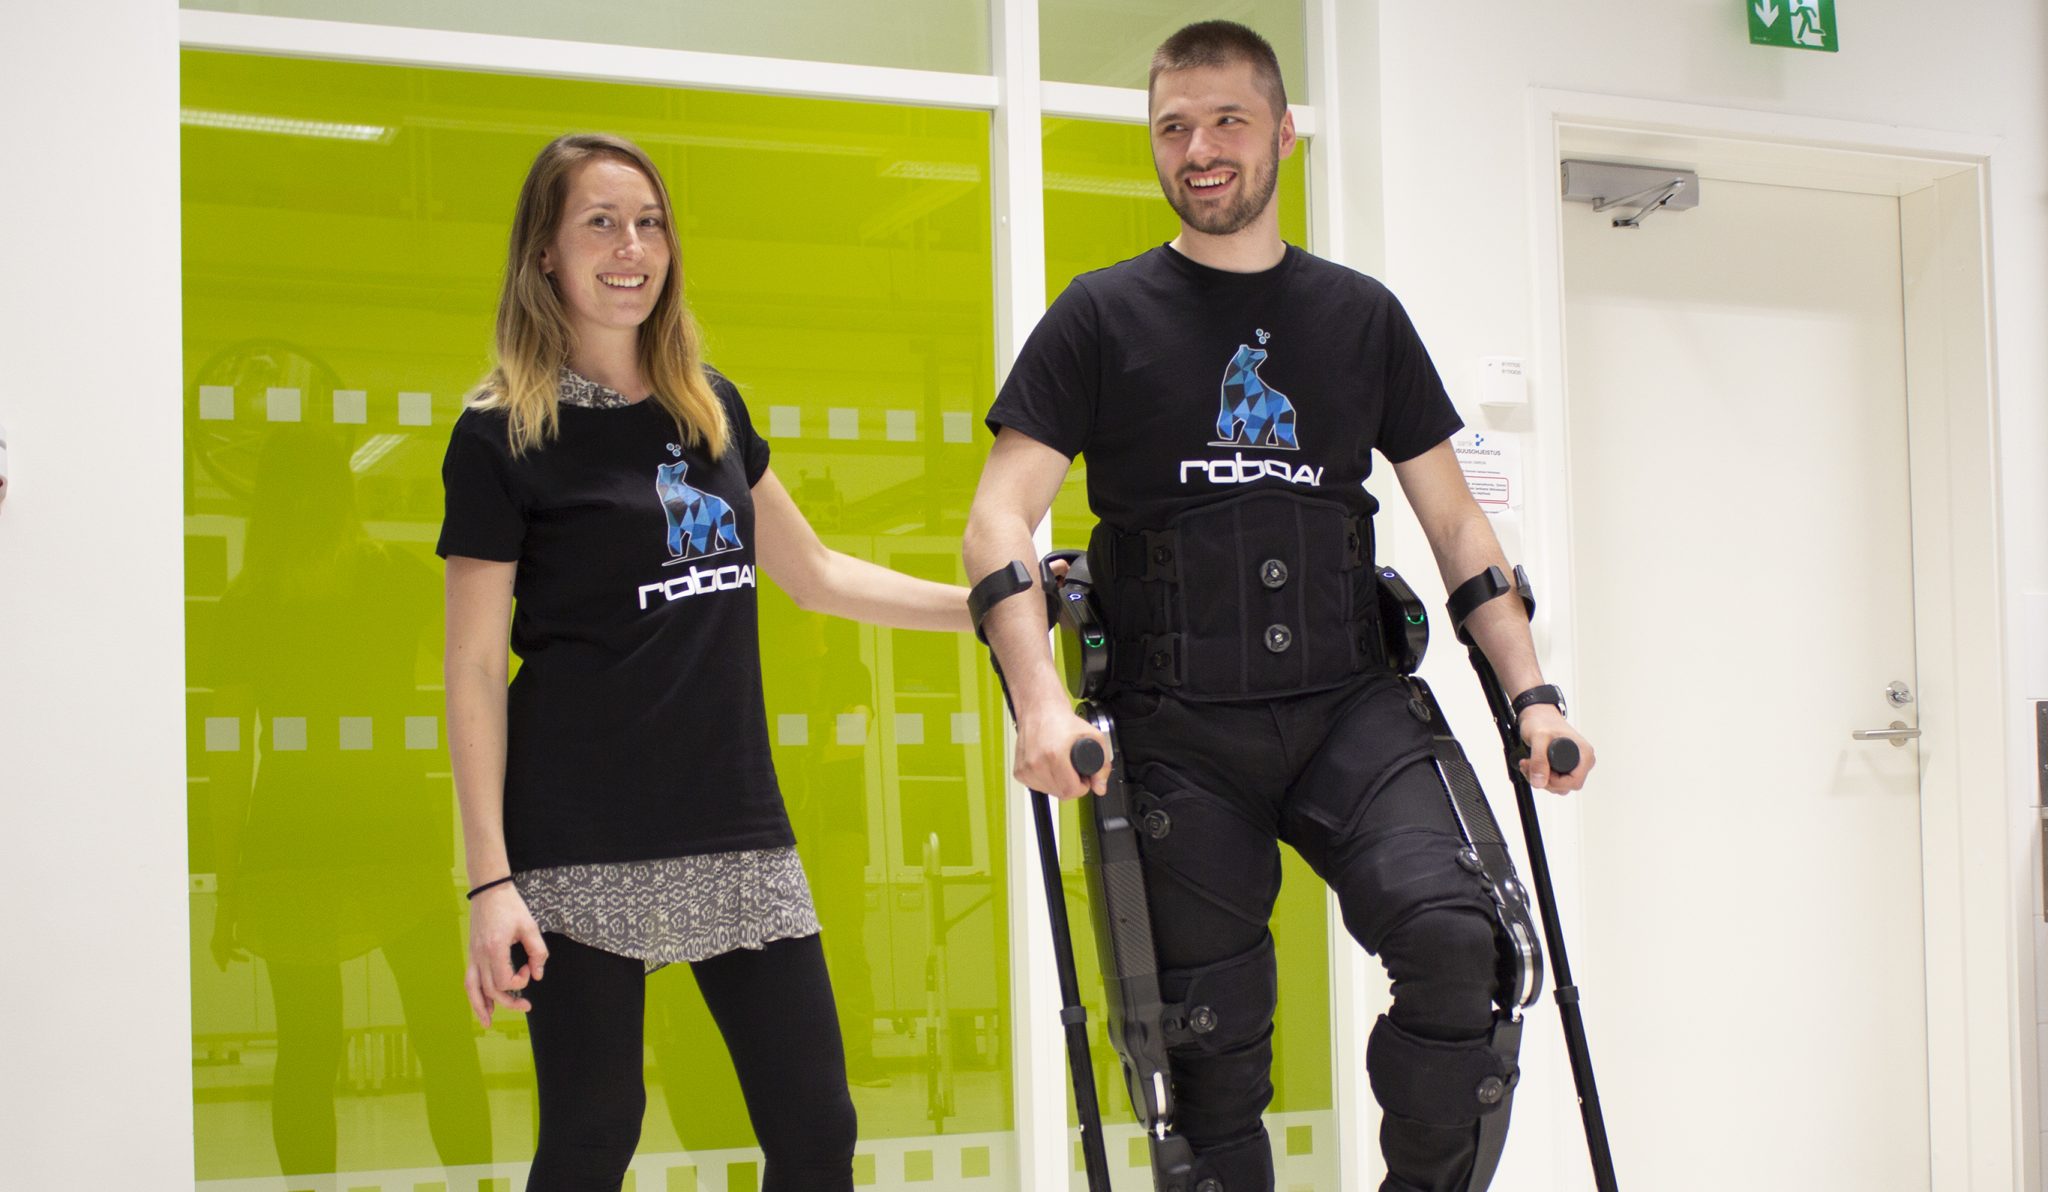 The picture shows a woman and a man using an exoskeleton walking robot.